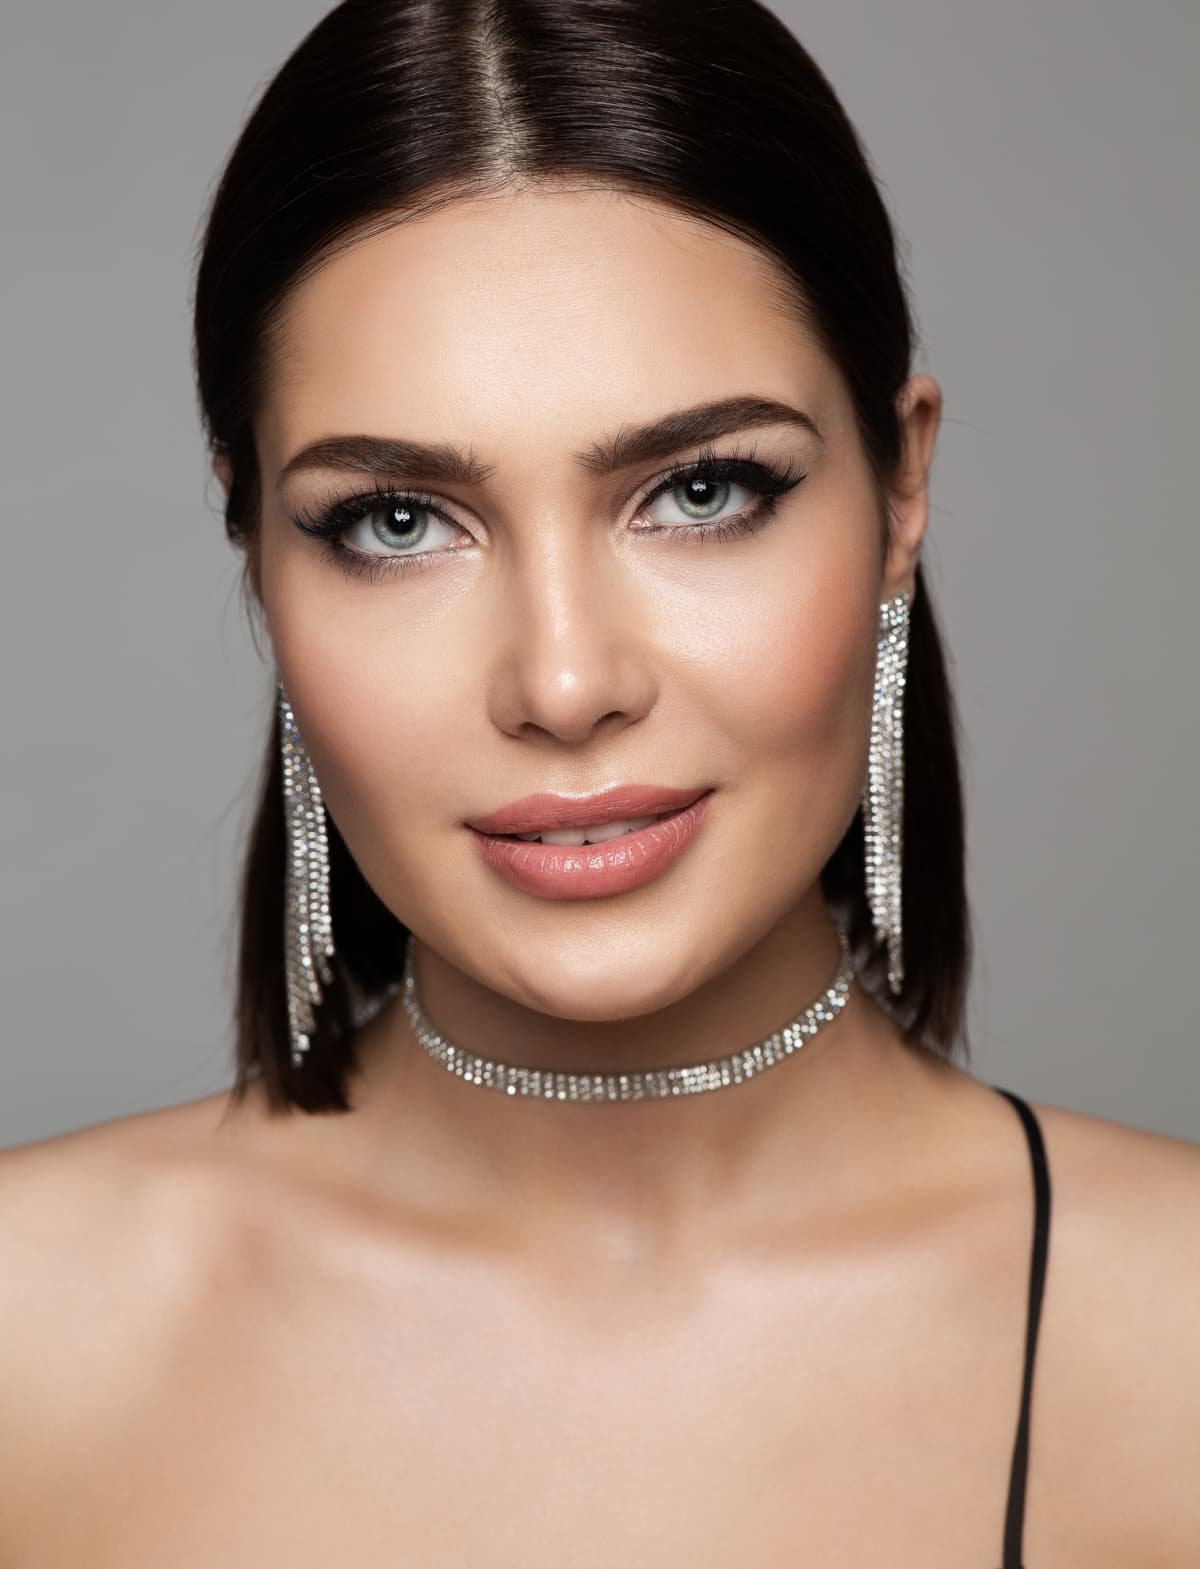 Closeup of a woman wearing silver earrings and necklace